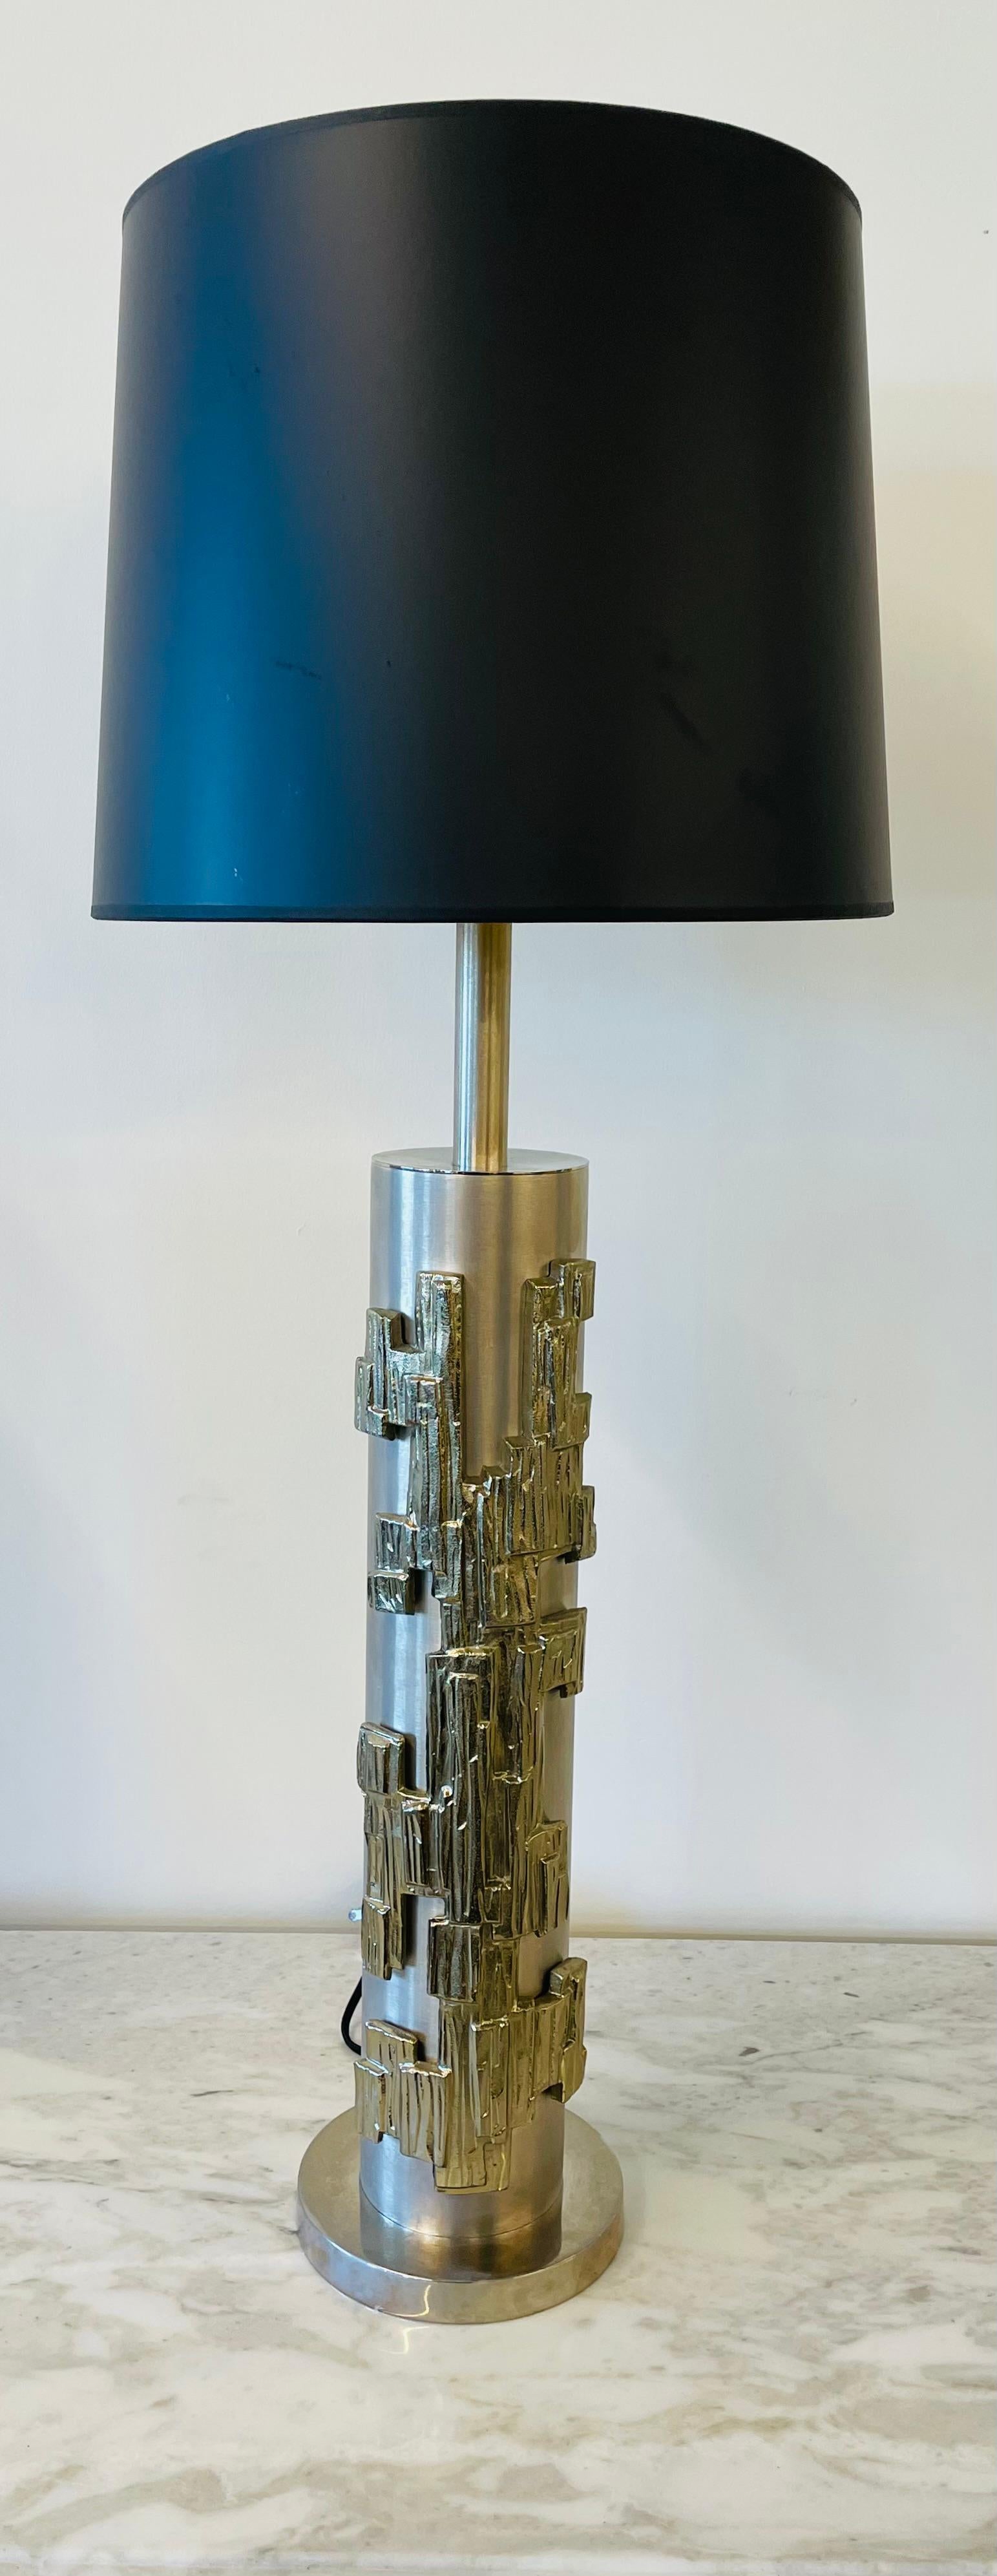 Pair of Modernist Table Lamps, Brushed Nickel and Sculptural Metal, 1970s In Good Condition For Sale In Stamford, CT